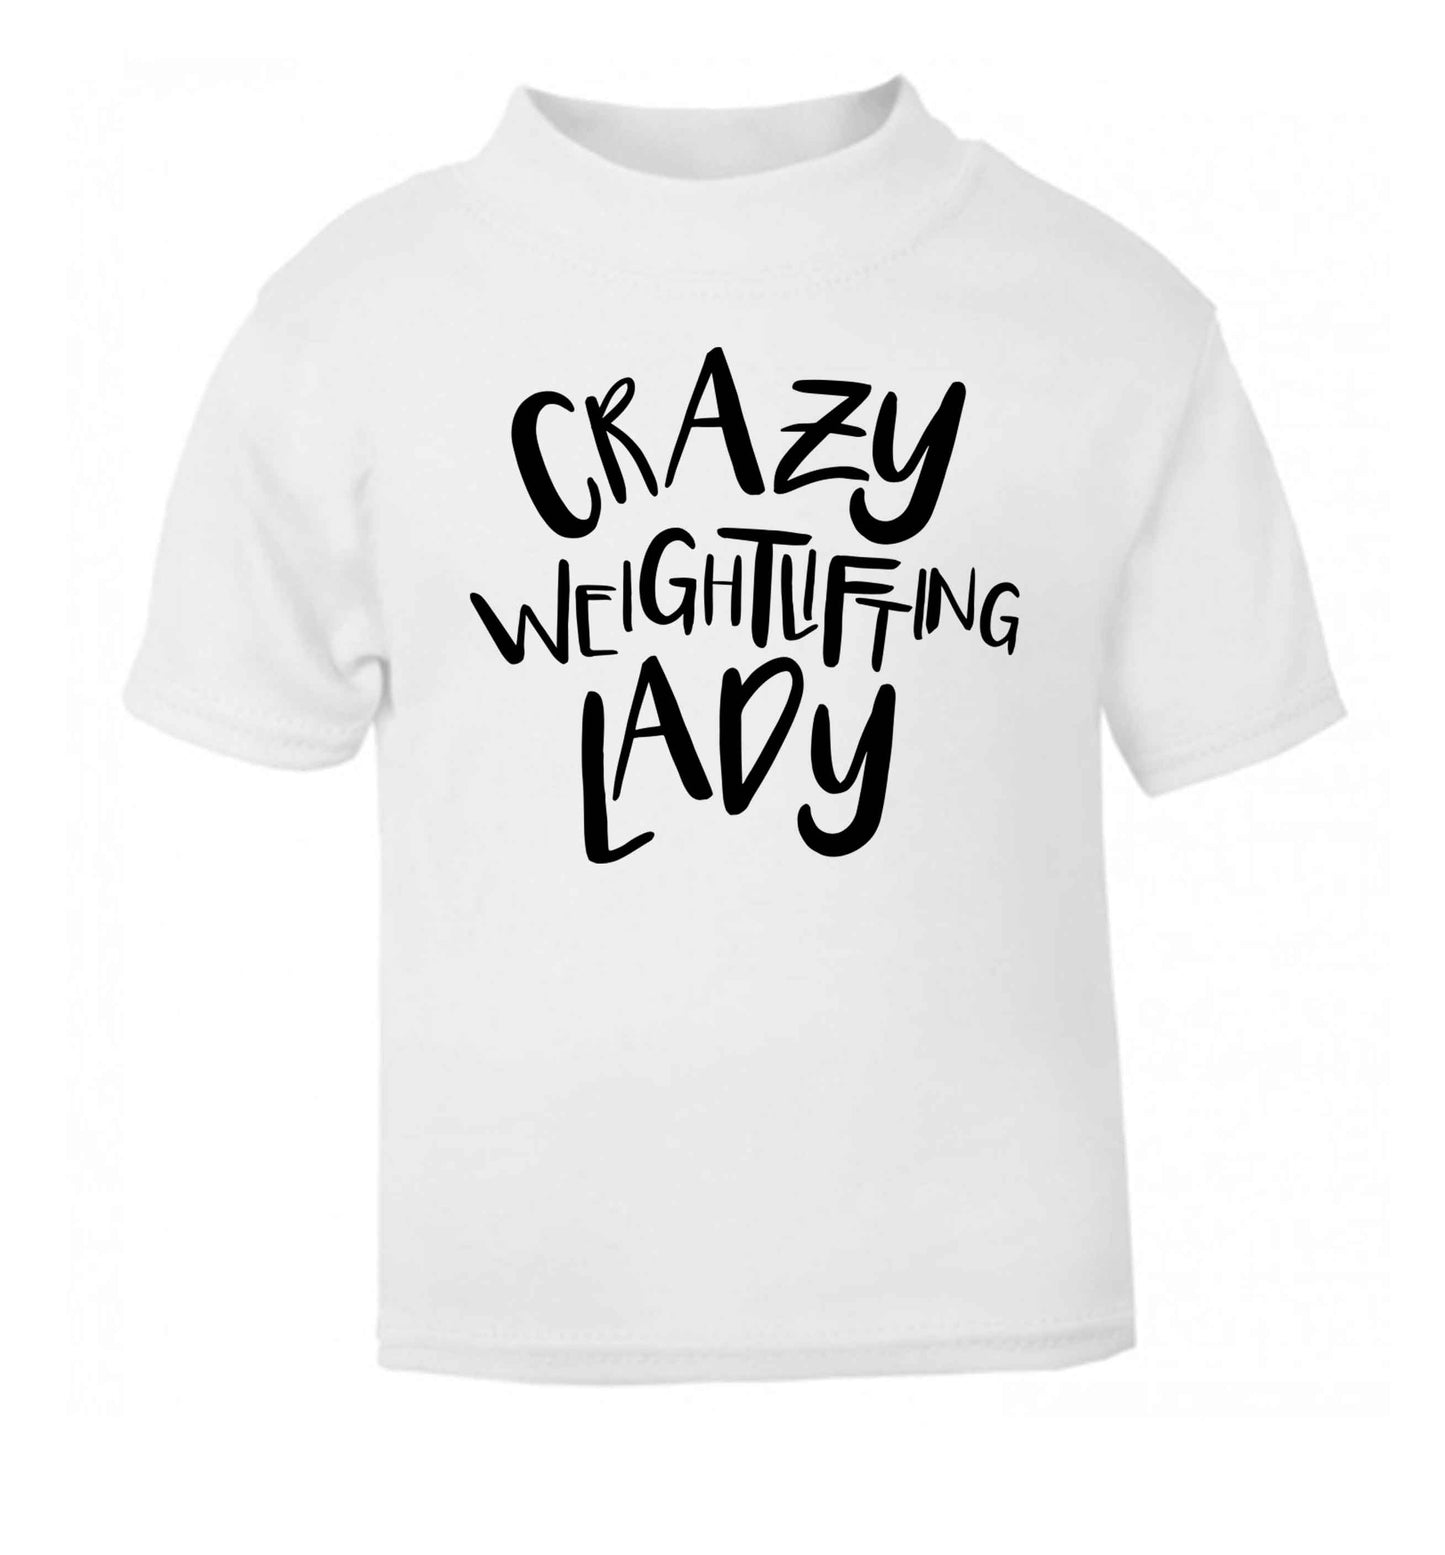 Crazy weightlifting lady white Baby Toddler Tshirt 2 Years